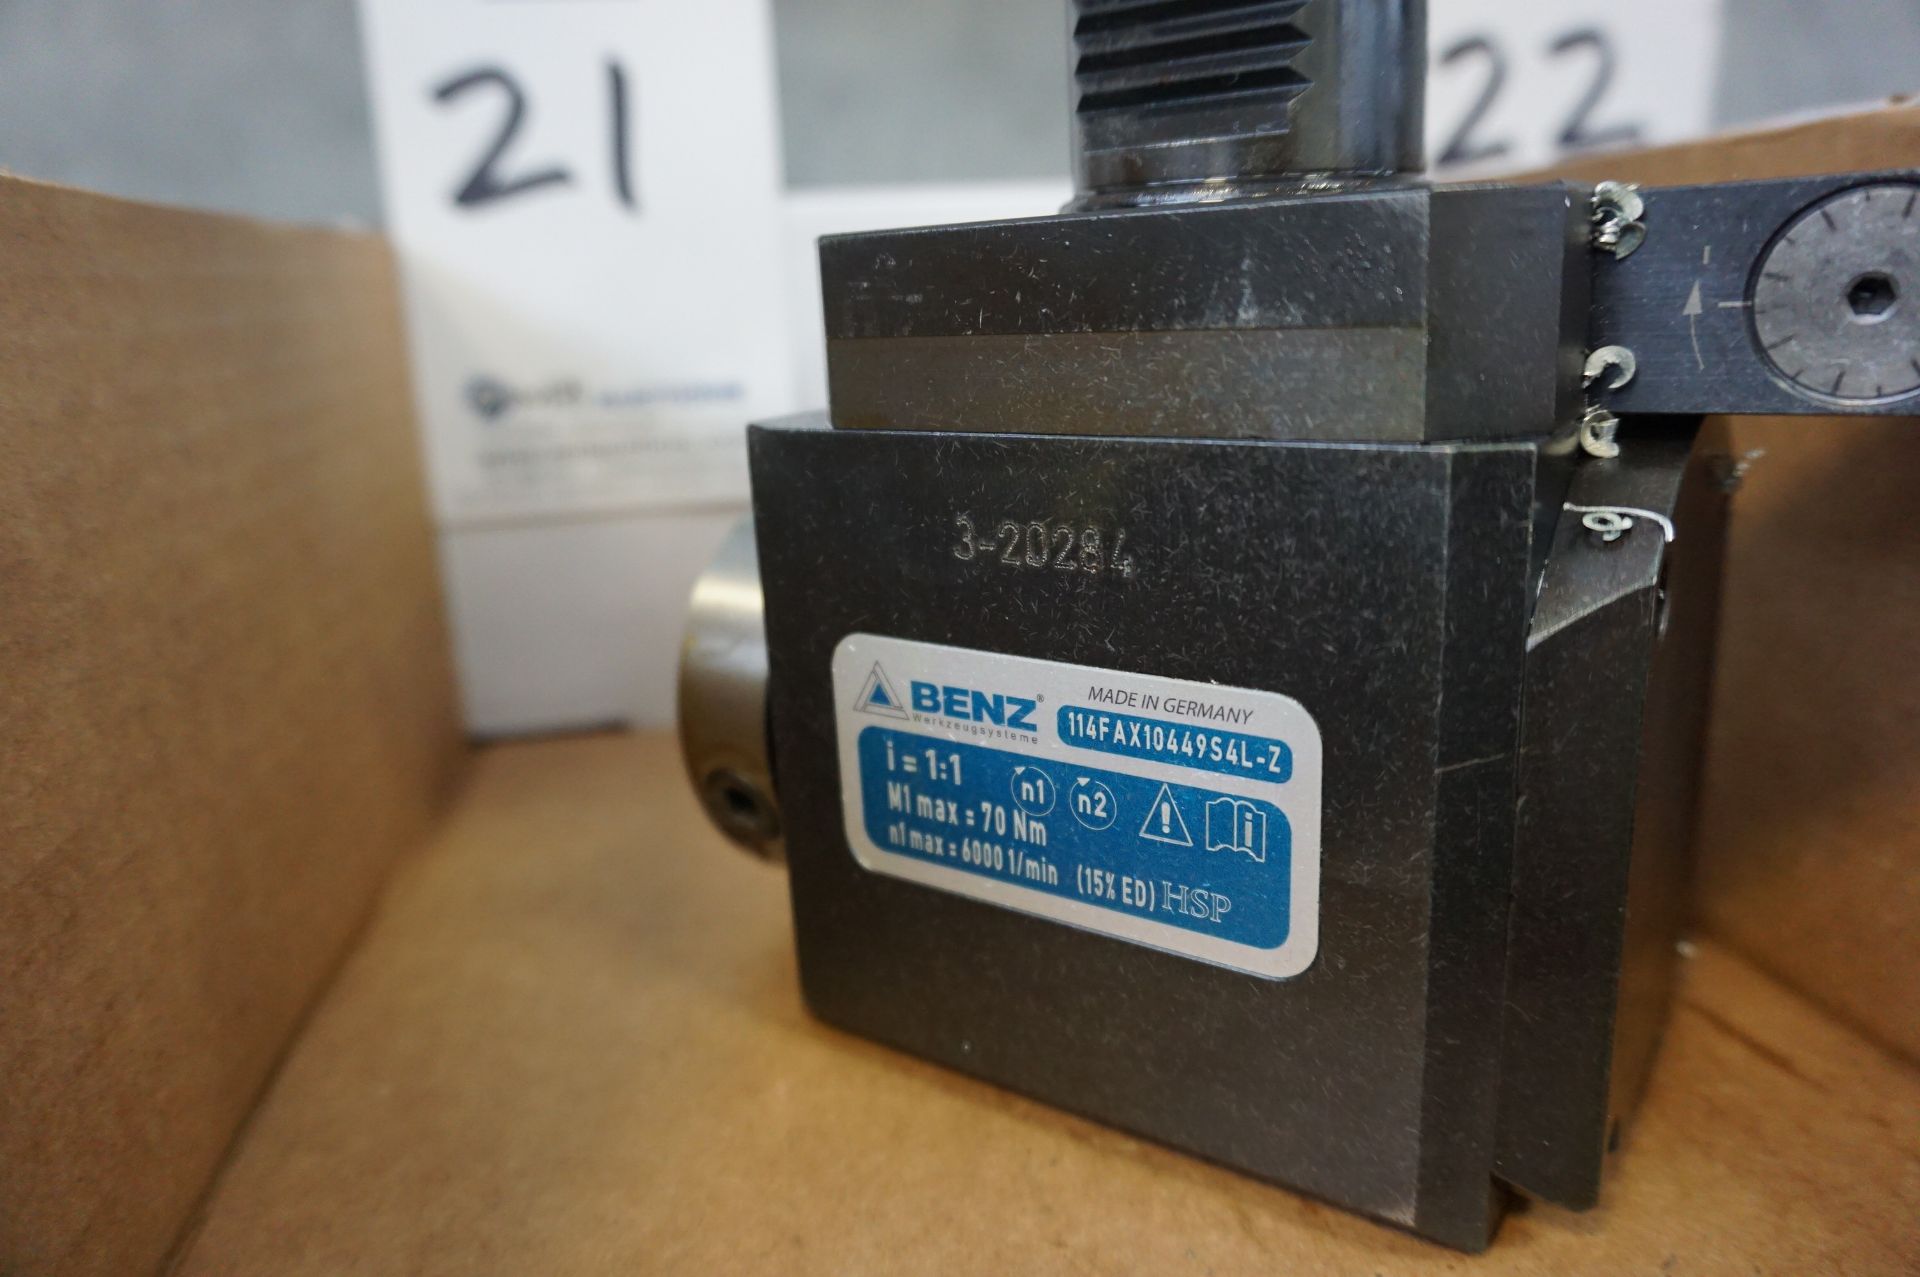 BENZ RADIAL LIVE TOOL, MODEL 114FAX10449S4L-Z (USED WITH HAAS) - Image 2 of 2